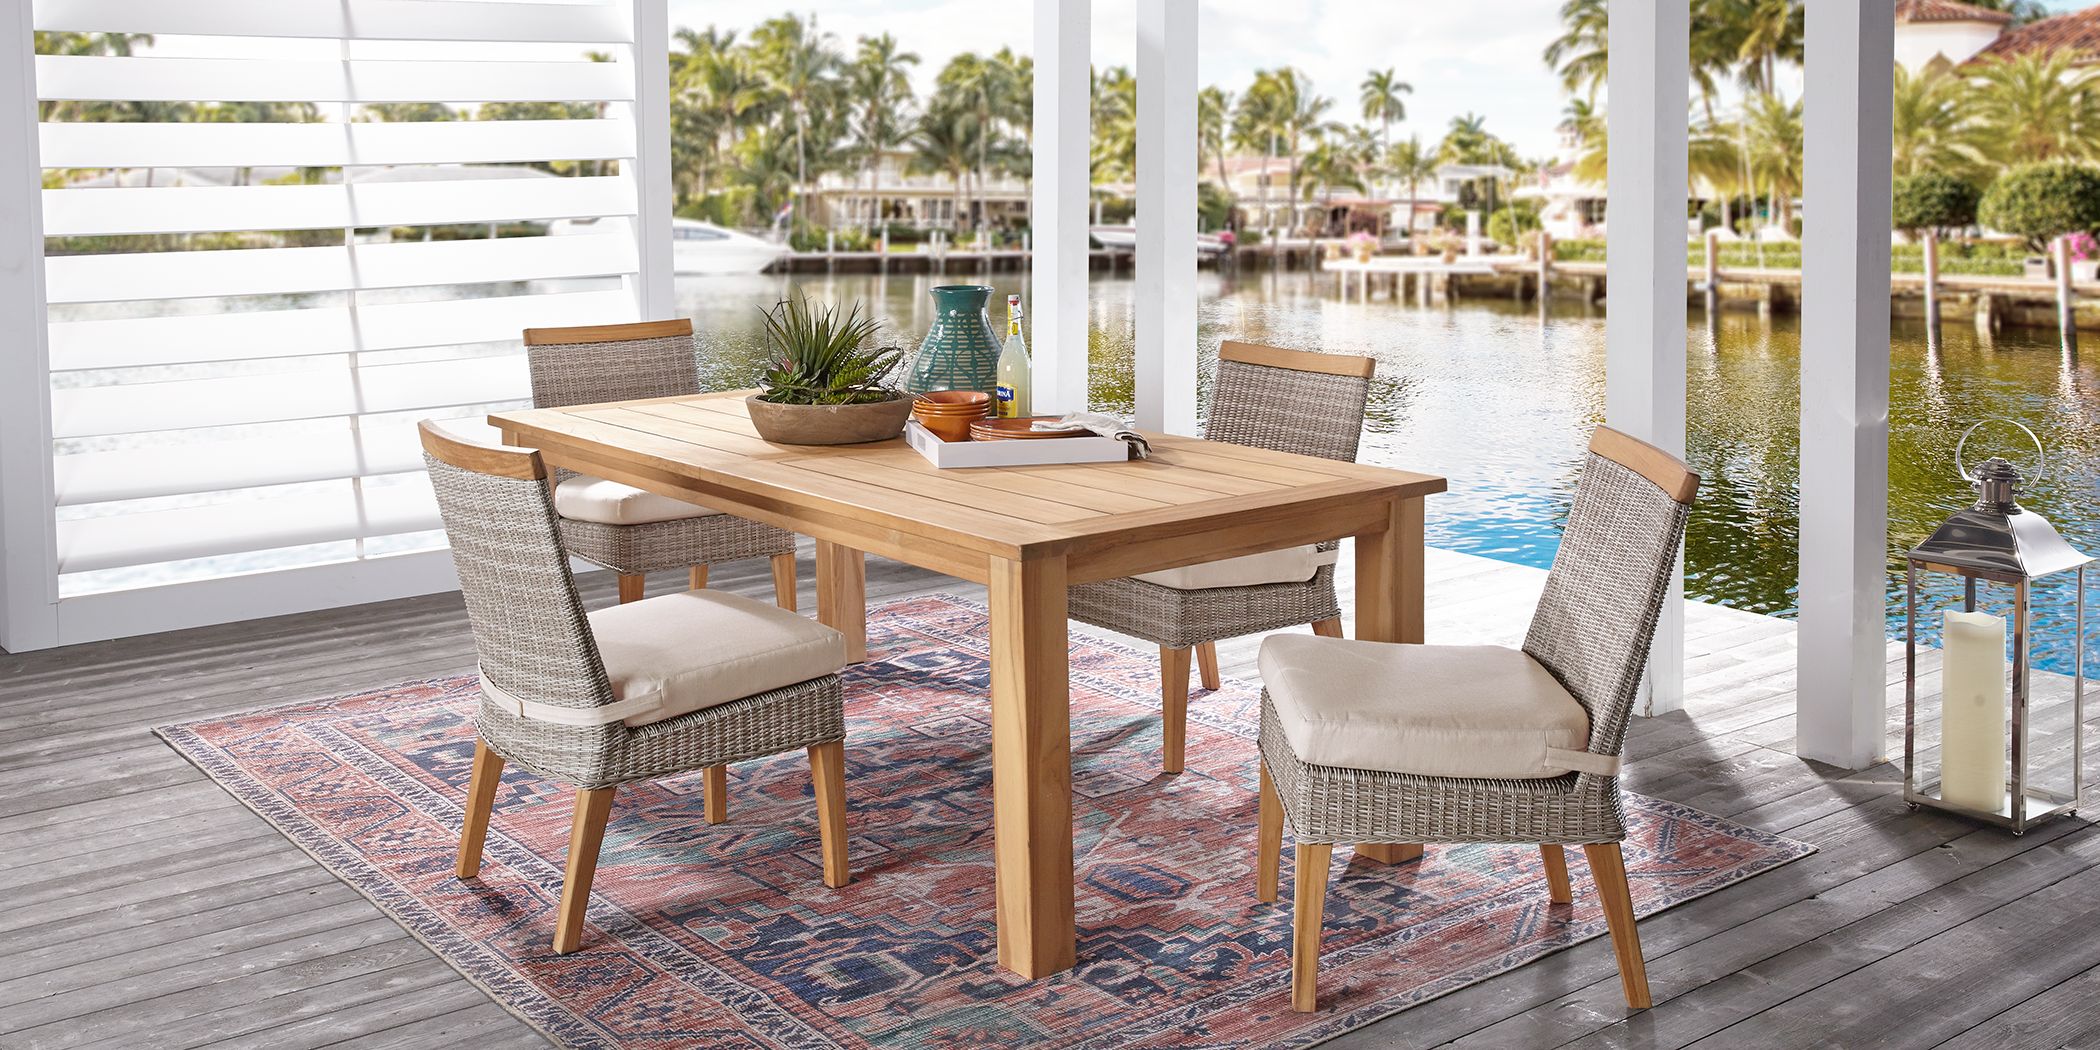 Hamptons Cove Teak 5 Pc Rectangle Outdoor Dining Set with Flax Cushions